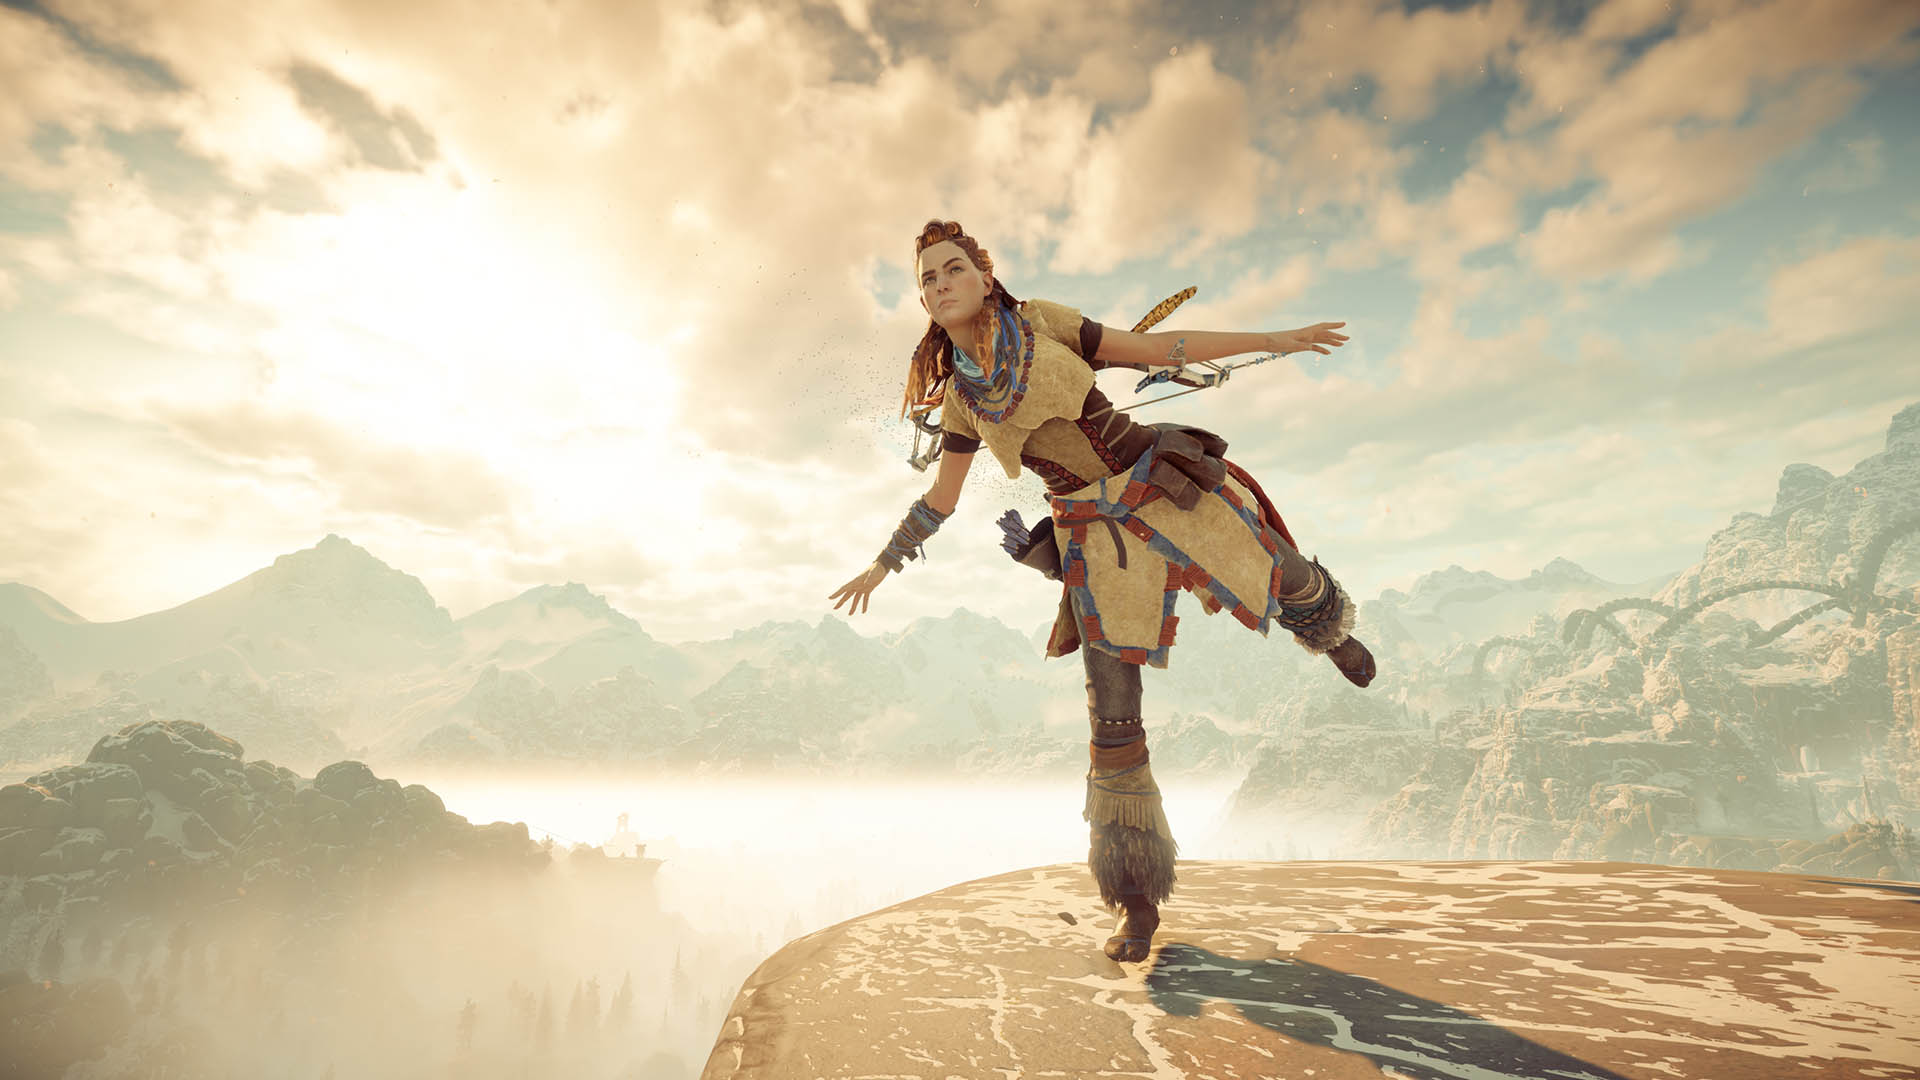 Horizon Zero Dawn on PC: Not the optimized port we were hoping for